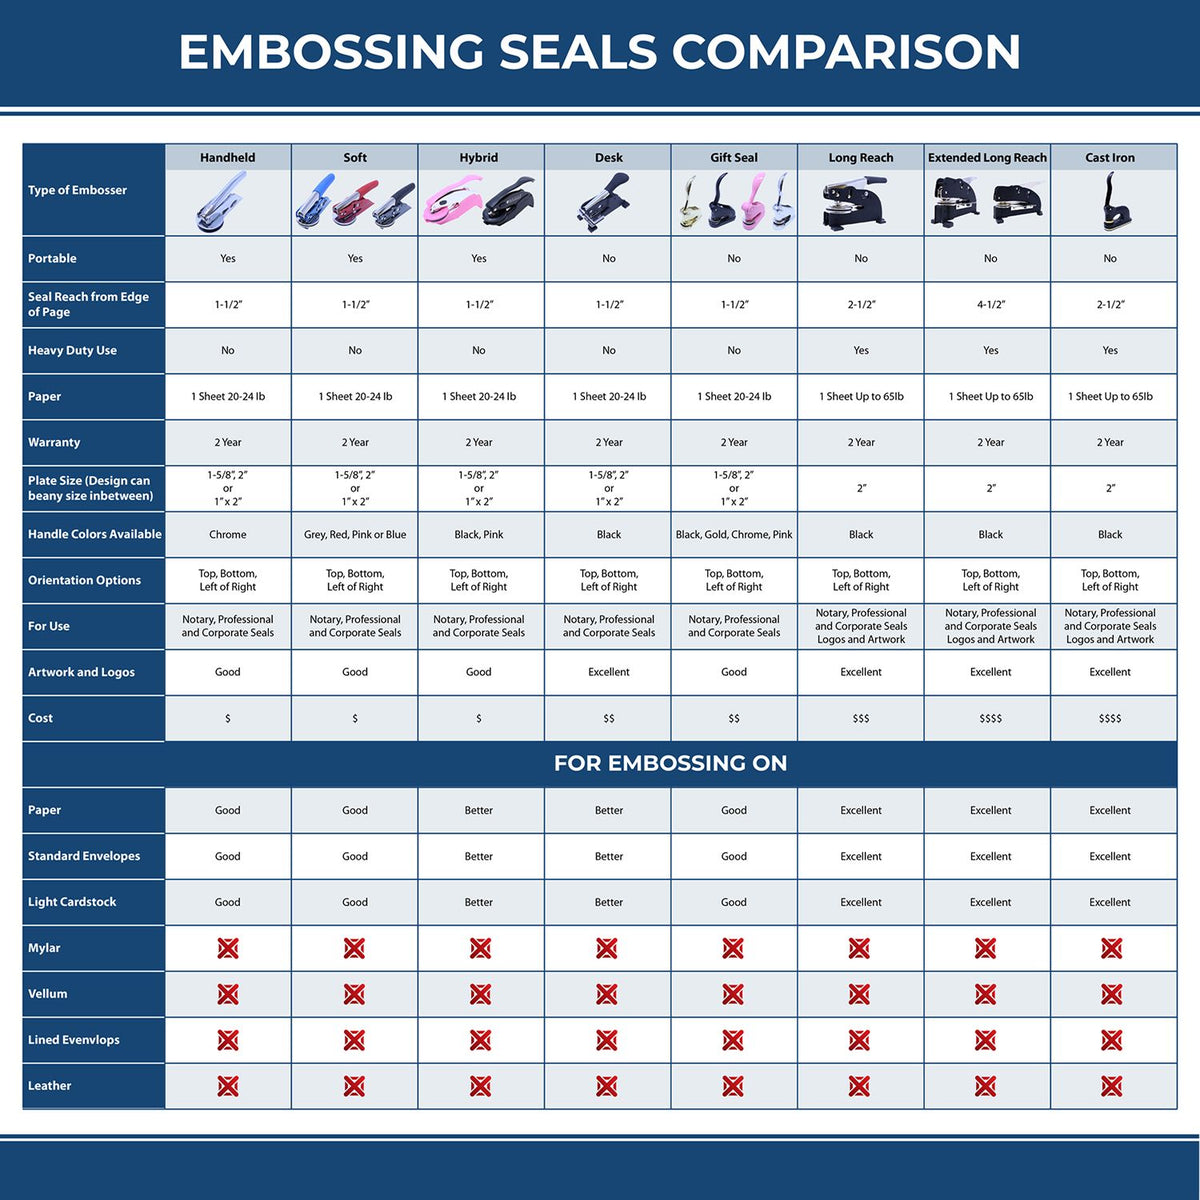 A comparison chart for the different types of mount models available for the Long Reach Hawaii PE Seal.